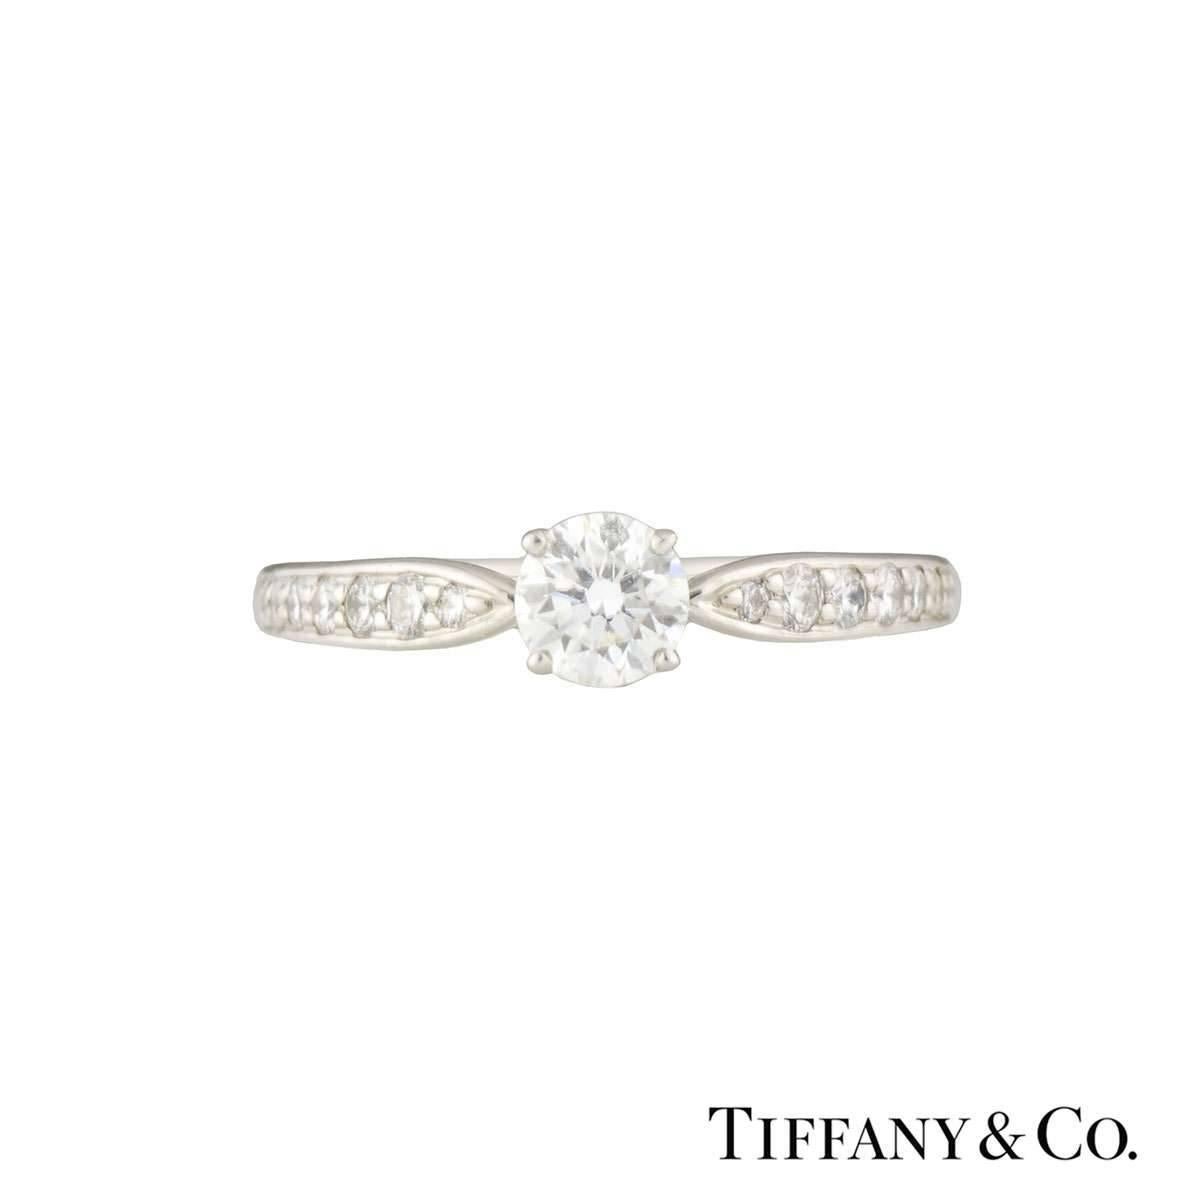 A stunning diamond Tiffany & Co. platinum ring from the Harmony collection. The ring is set to the centre with a round brilliant cut diamond weighing 0.32ct, F colour and VS2 in clarity. The ring has half diamond set shoulders totalling